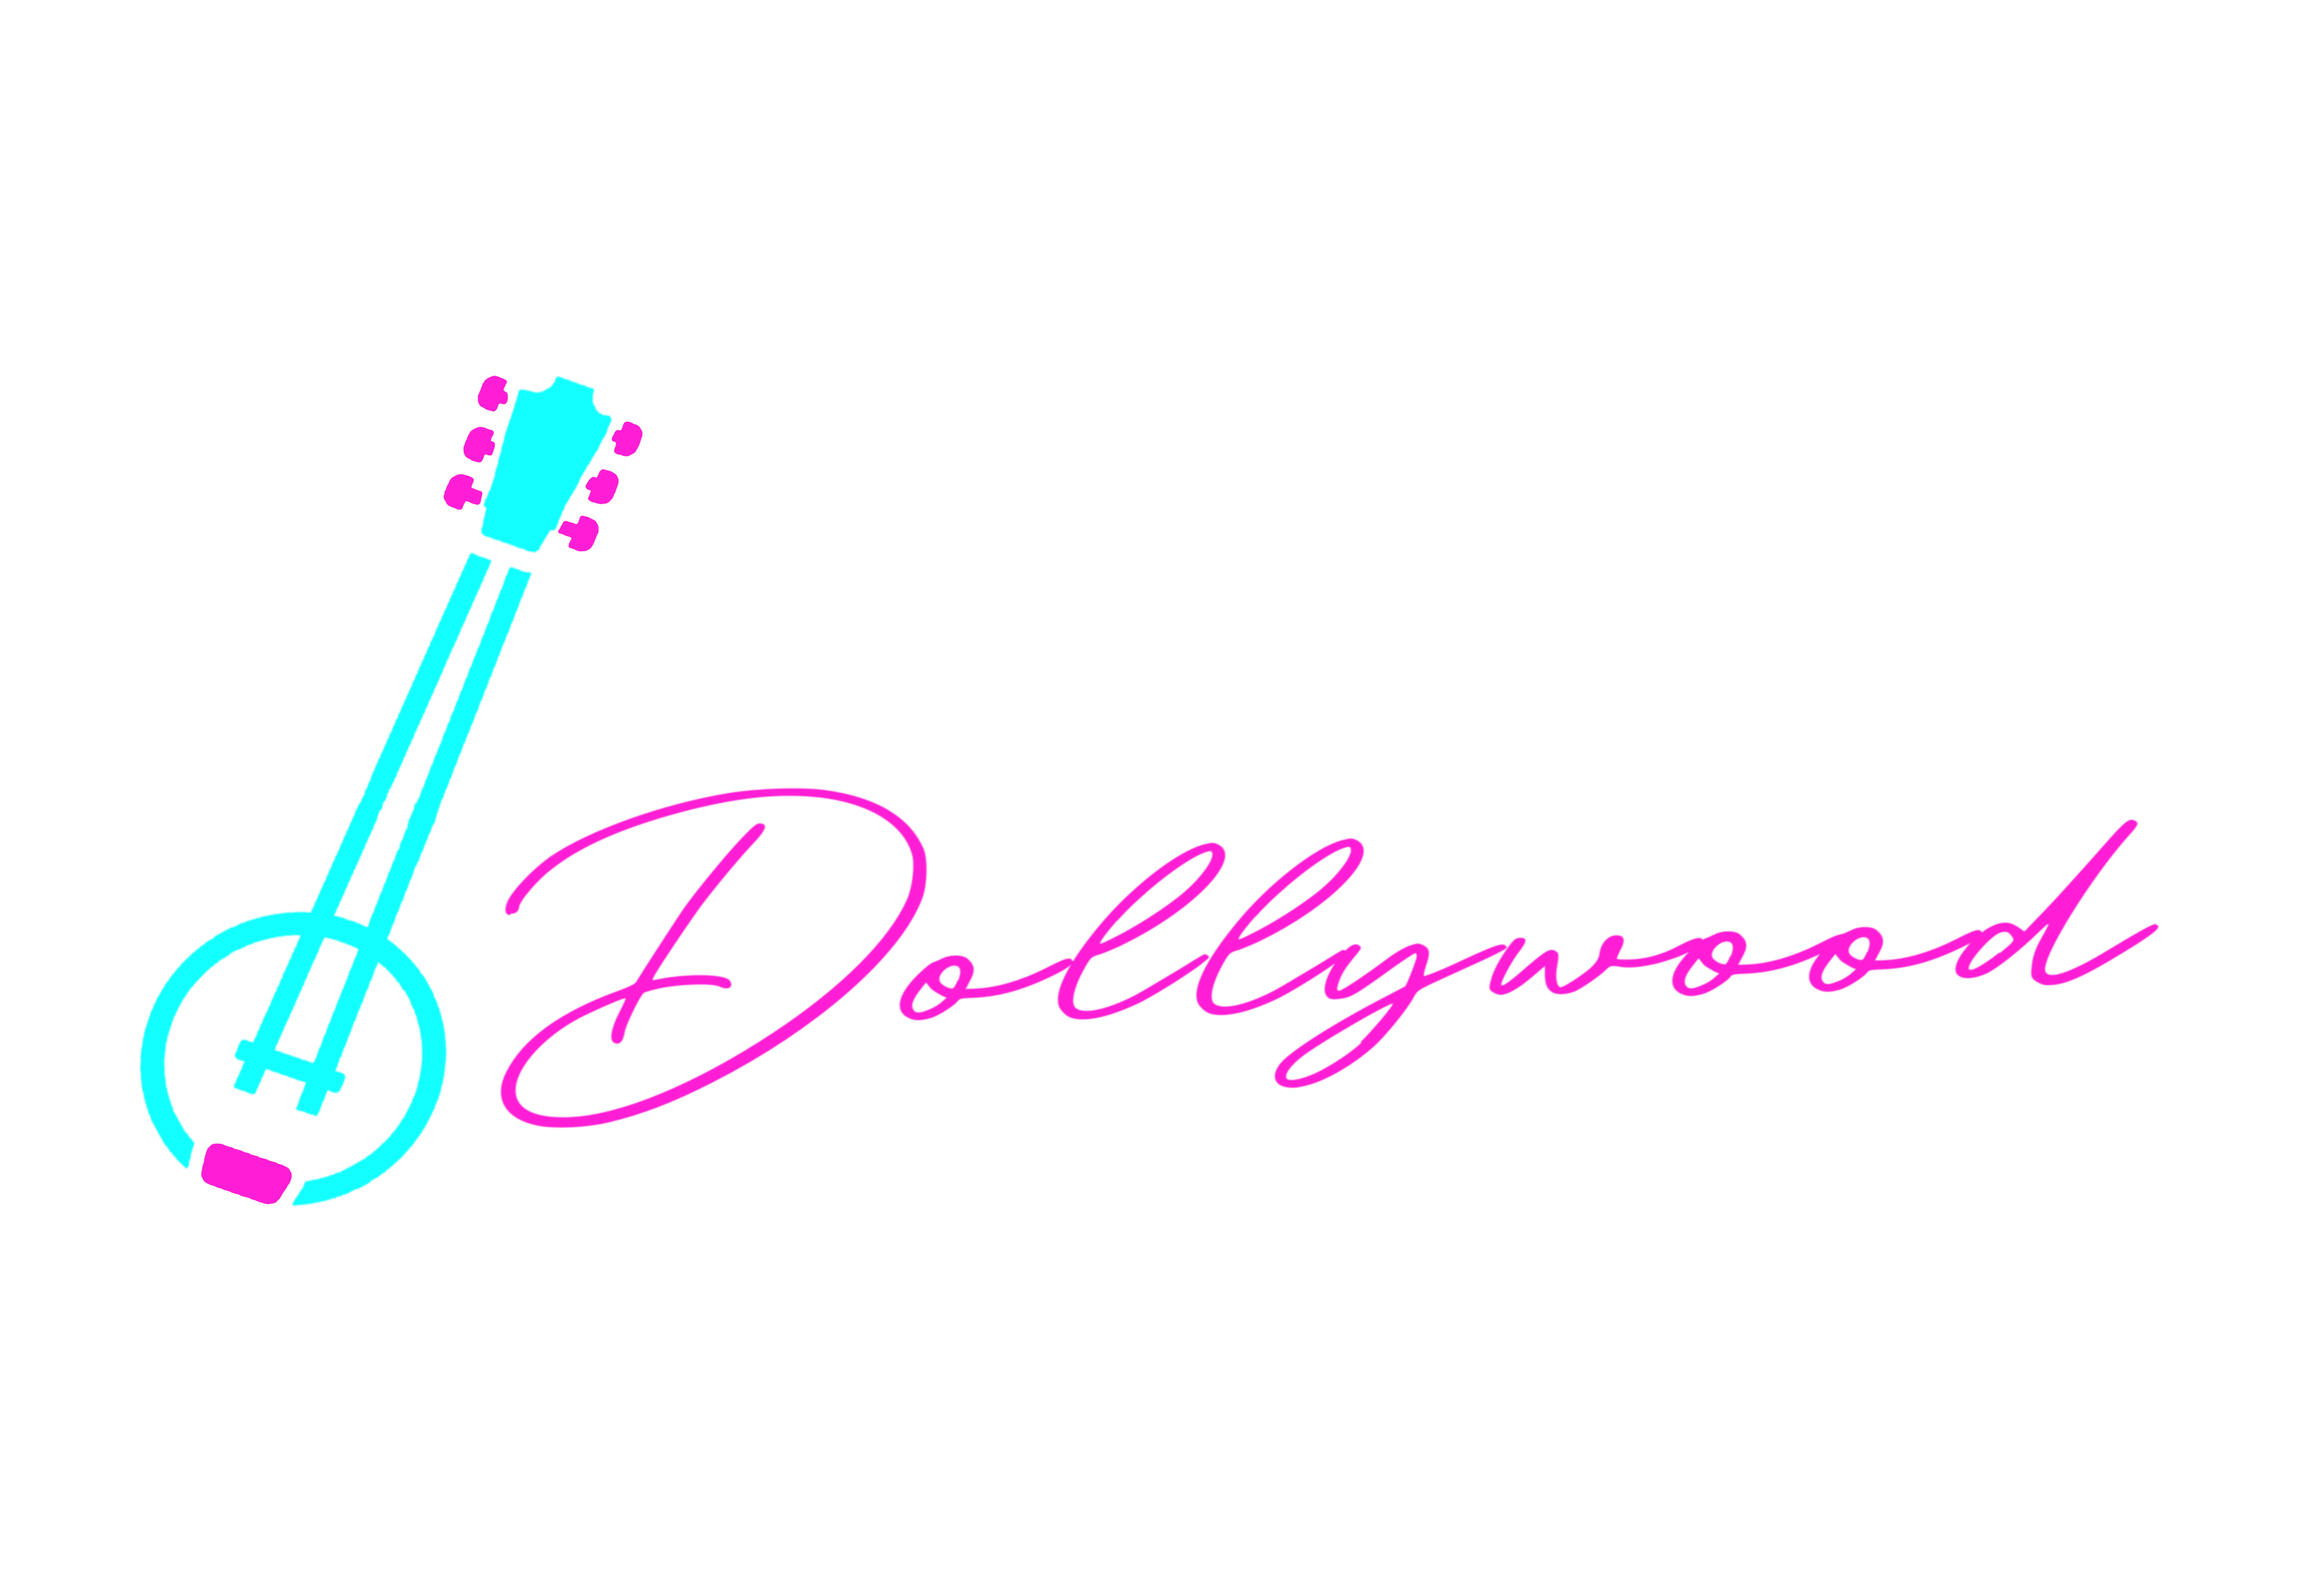 Frankie Goes To Dollywood